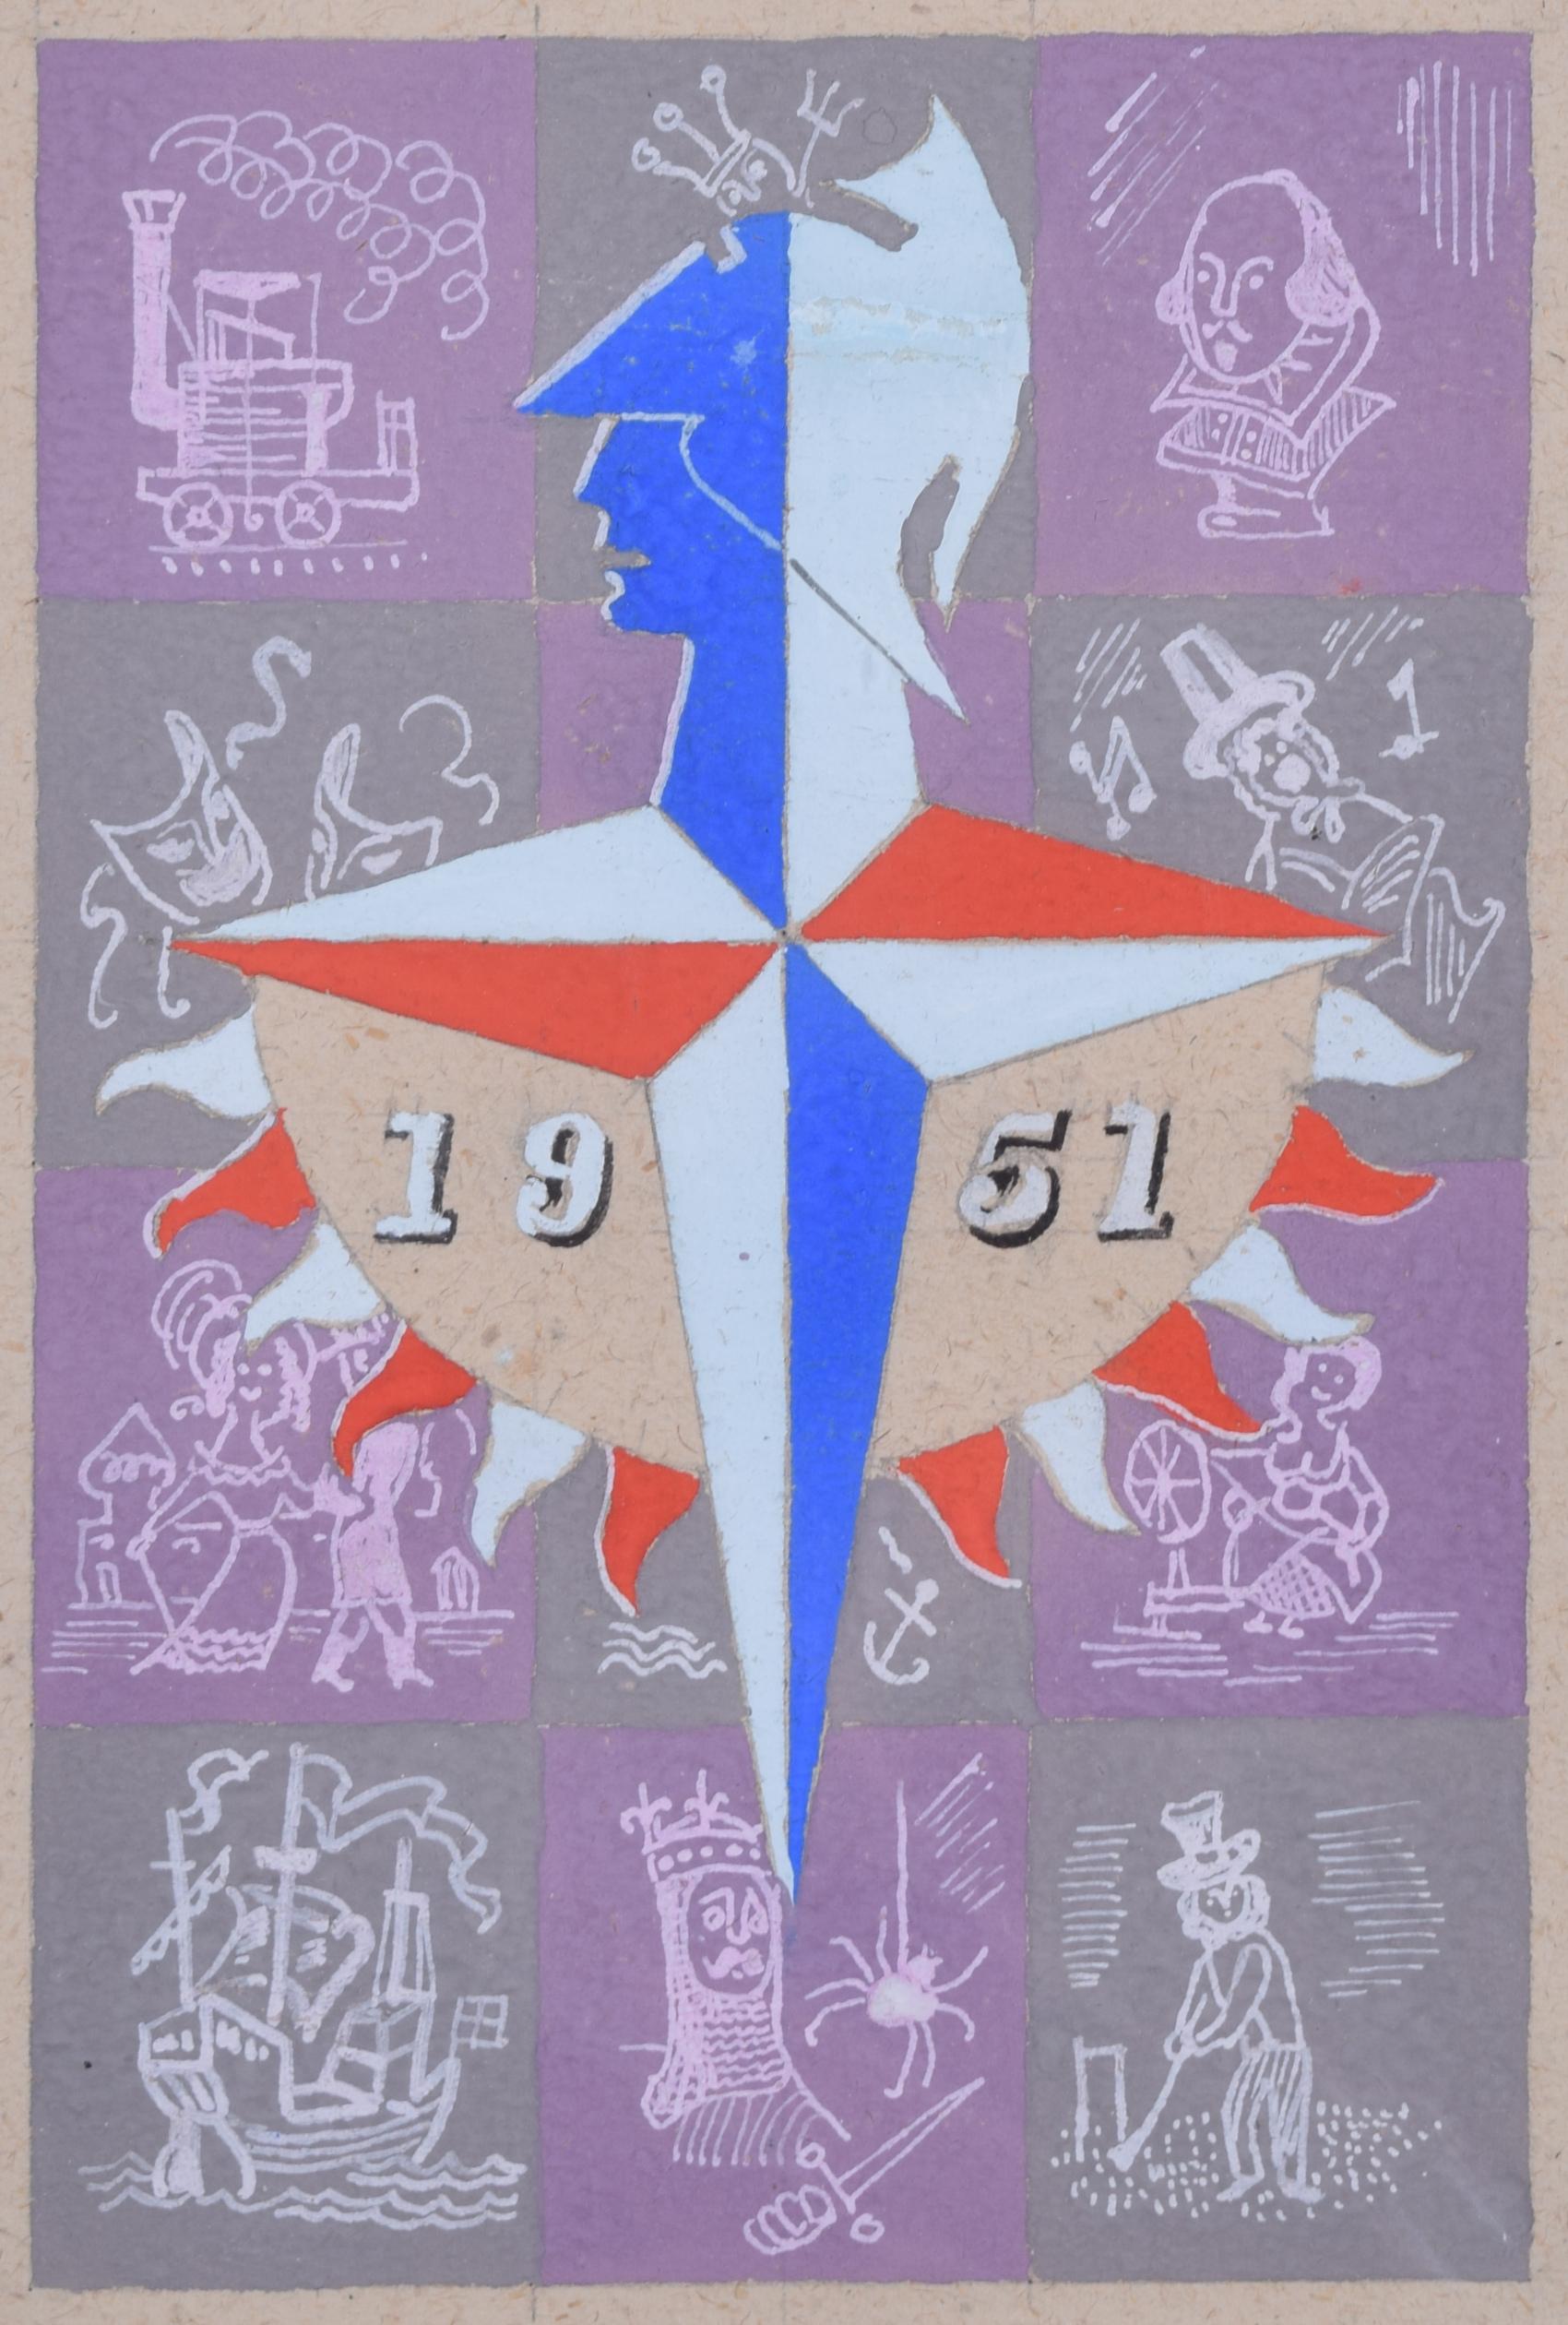 To see more, scroll down to "More from this Seller" and below it click on "See all from this Seller."

Peter J Wright after Abram Games (1914 - 1996)
Festival of Britain Logo (1951)
Gouache
21 x 13 cm

A gouache painting of Abram Games' fantastic